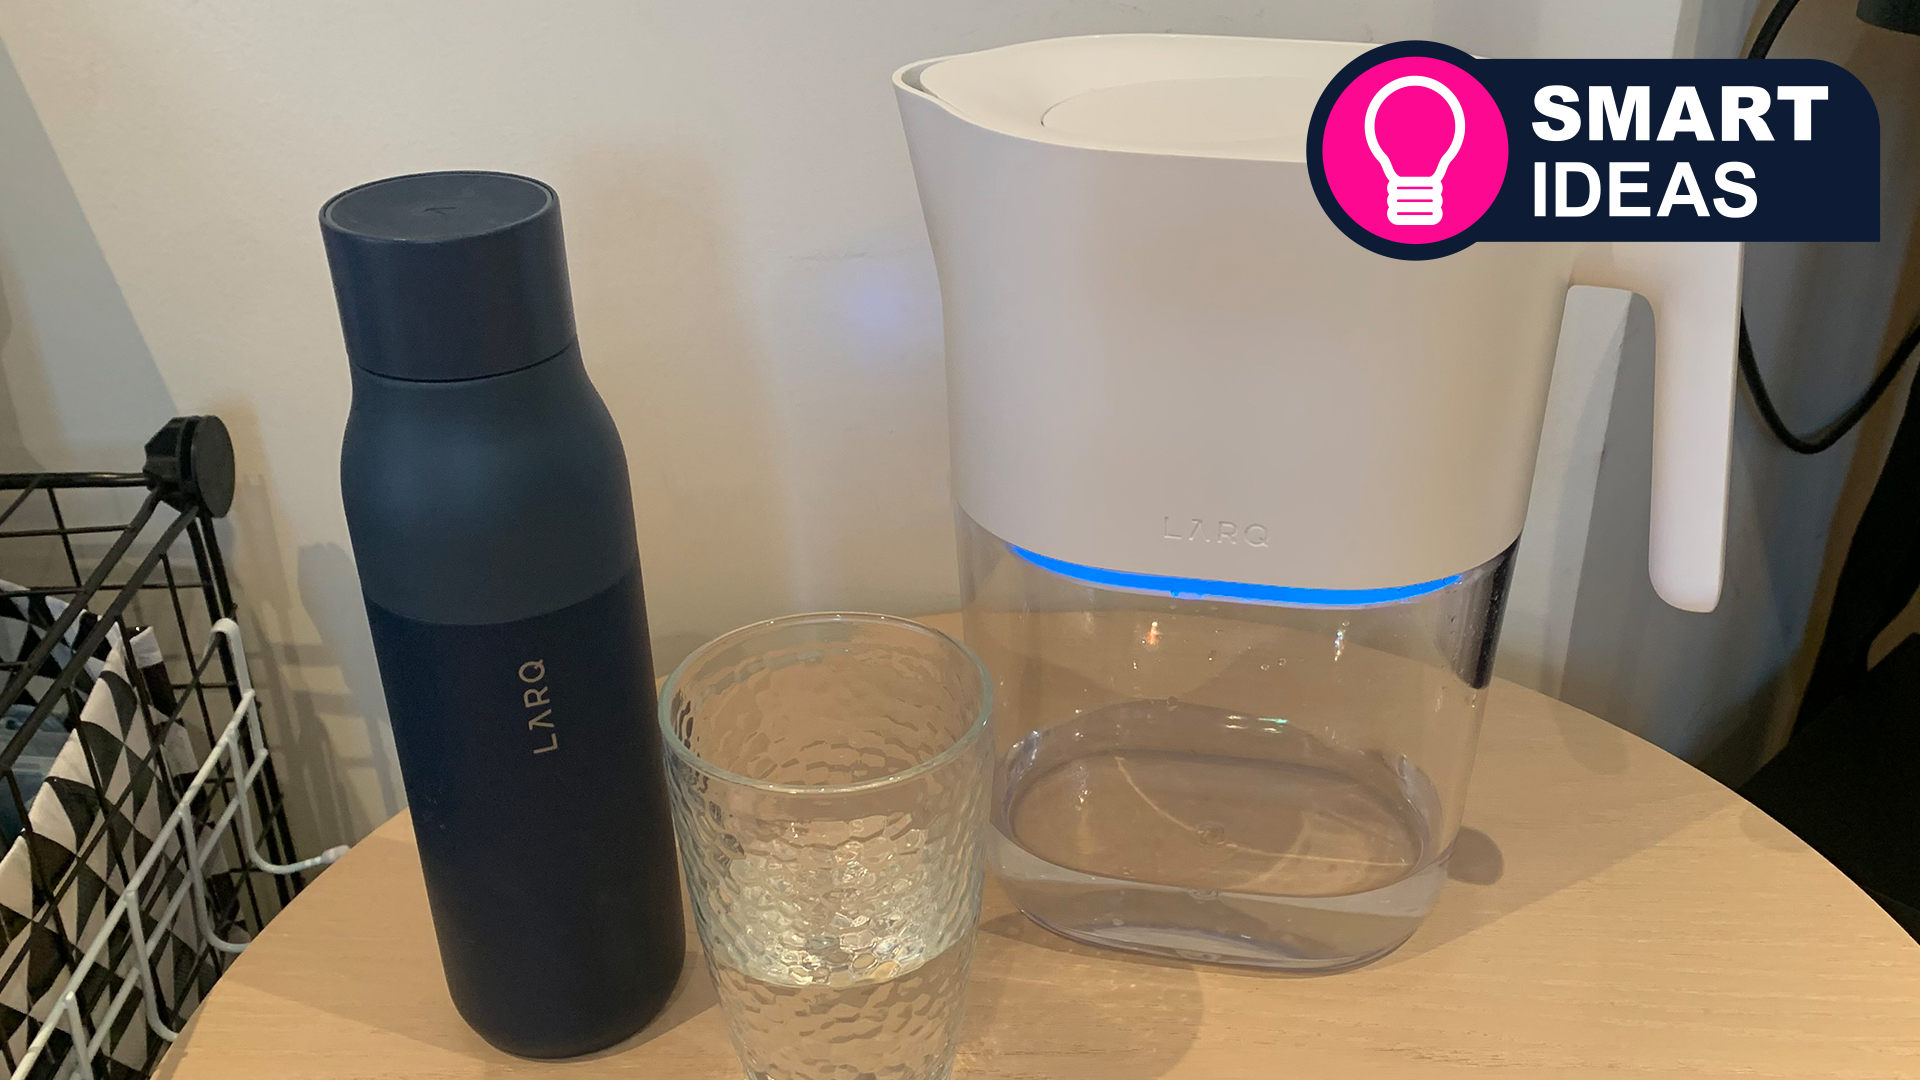 I hate the taste of water, but Larq's smart water devices have finally